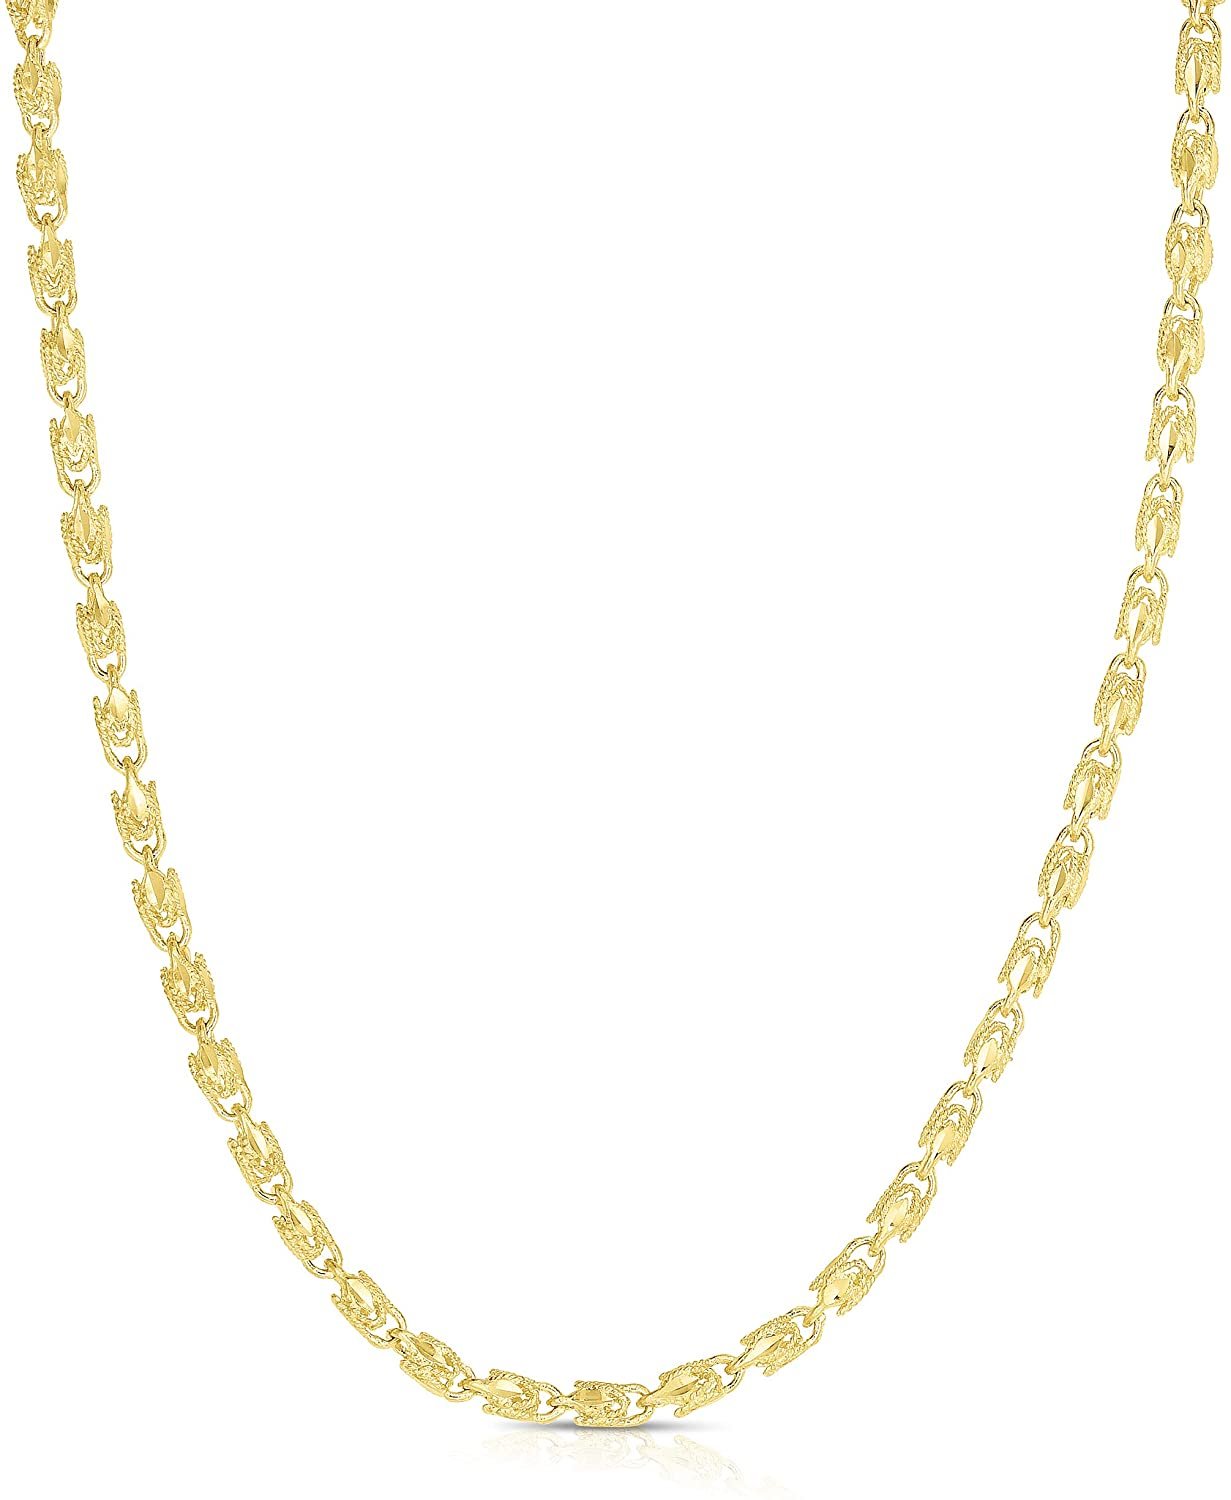 10k Yellow Gold 2.5mm Solid Turkish Rope Chain Necklace